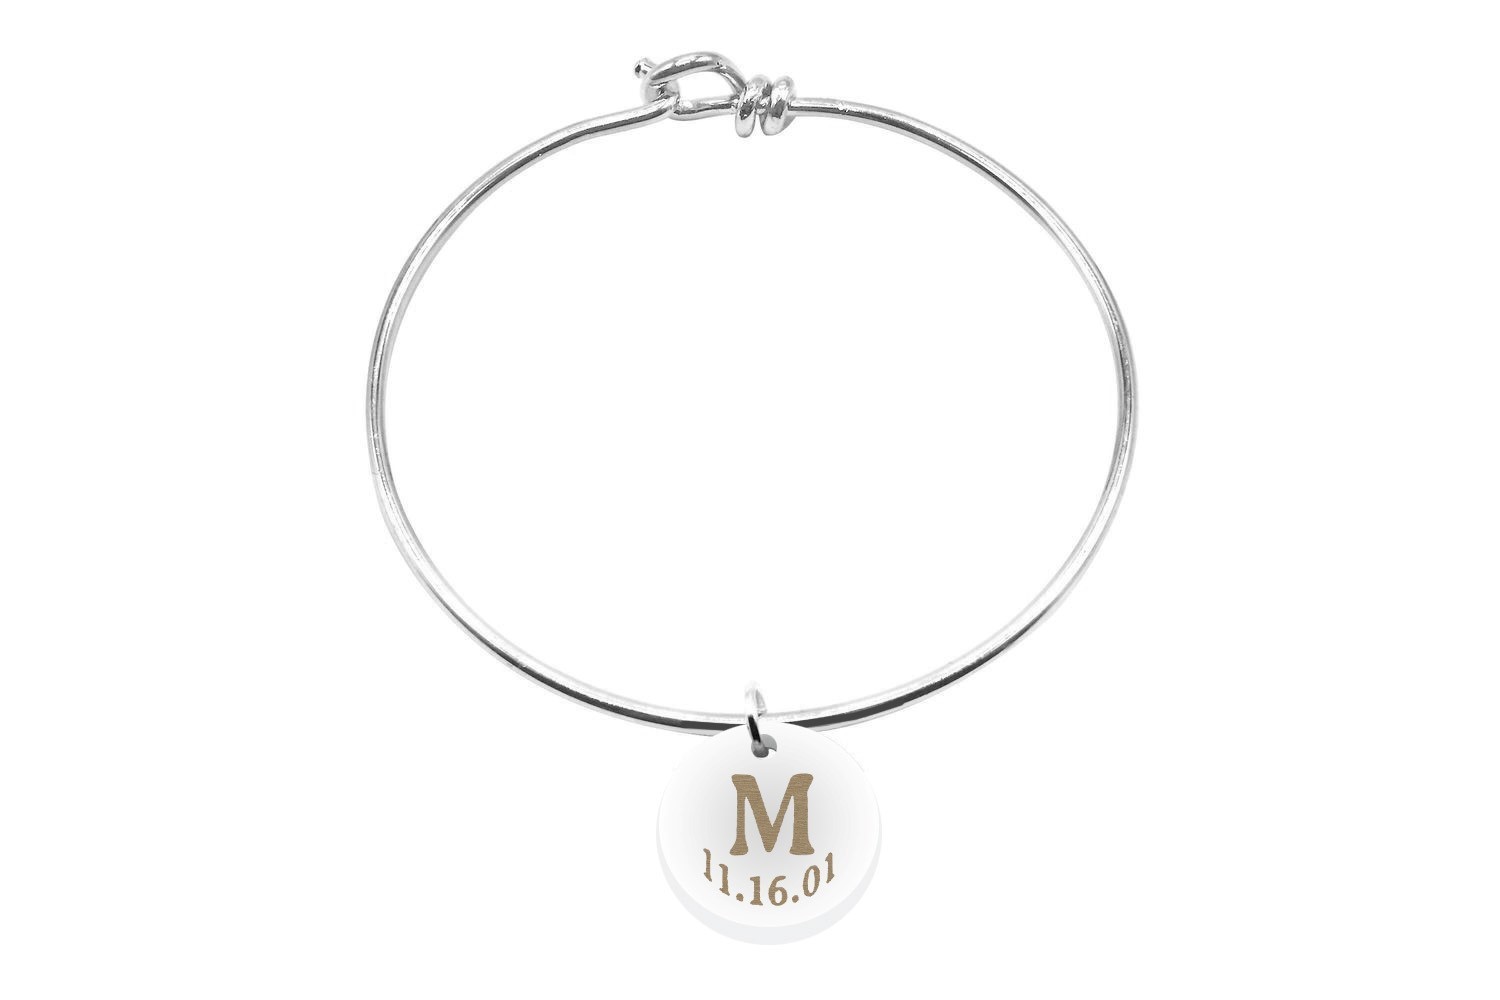 Initial Charm with Date on Decorative Wire Bracelet